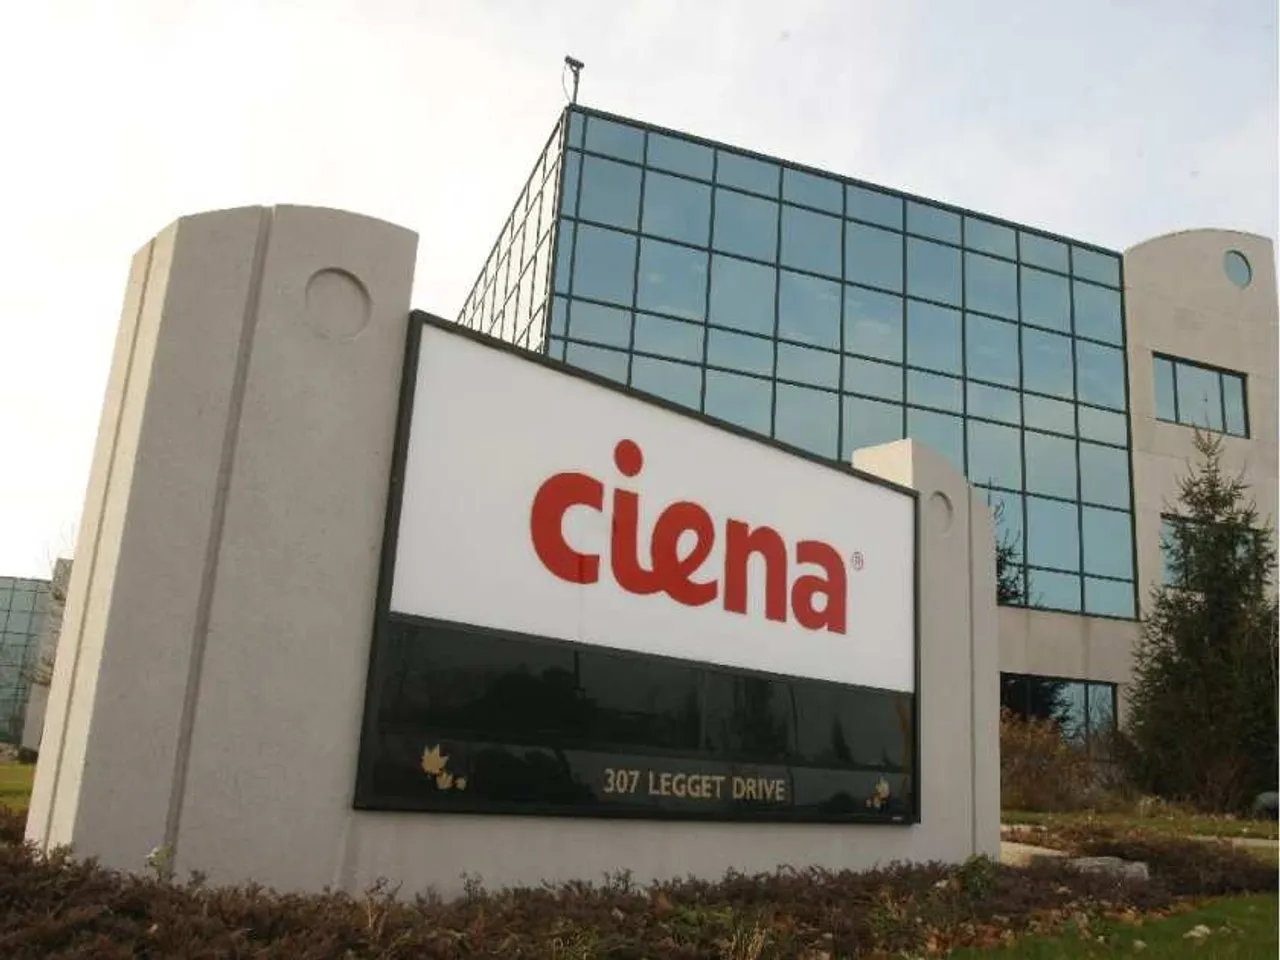 Southern Cross achieves 800G with Ciena waveLogic 5